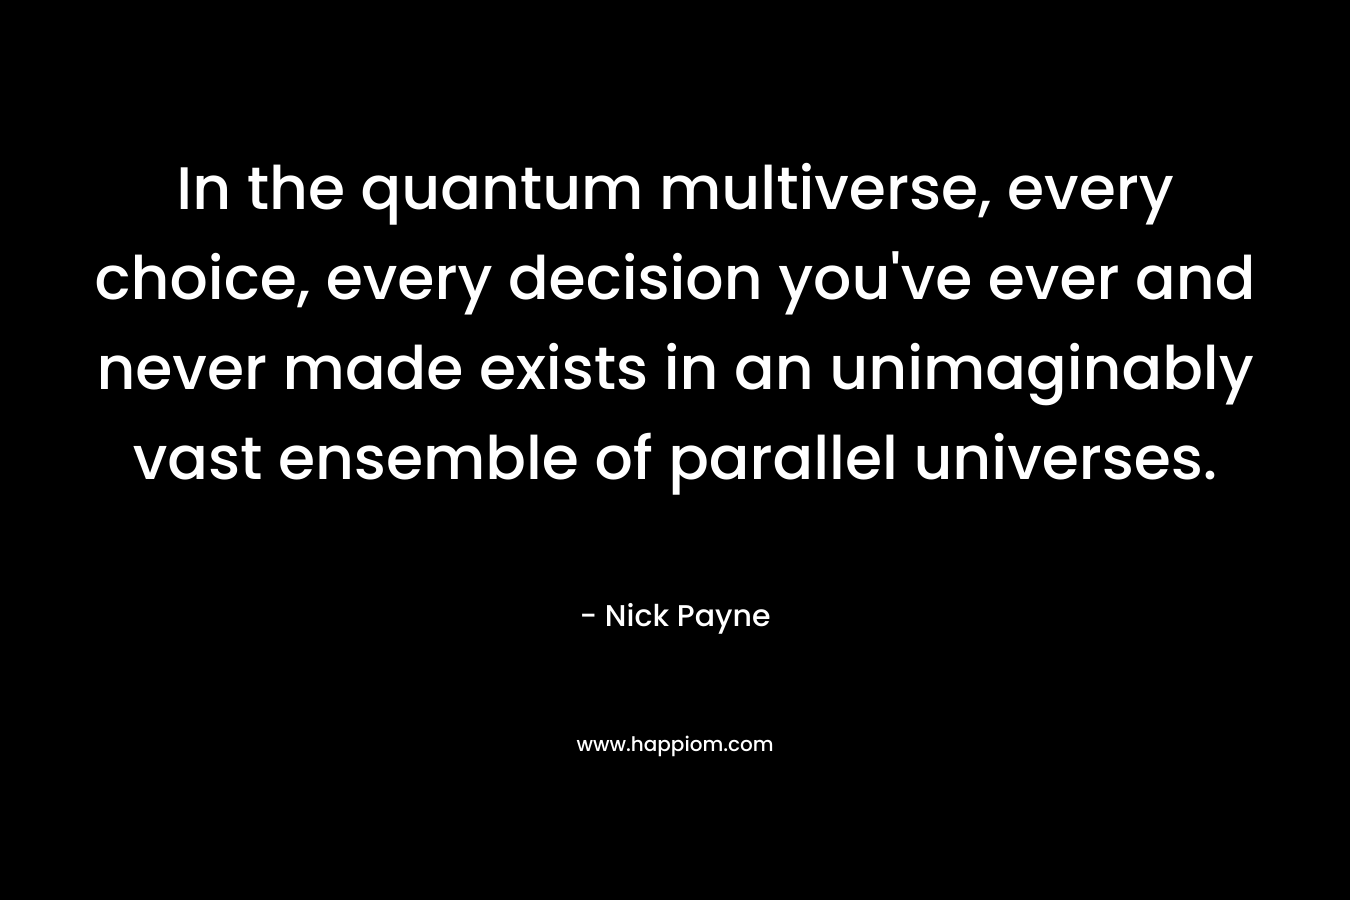 In the quantum multiverse, every choice, every decision you've ever and never made exists in an unimaginably vast ensemble of parallel universes.